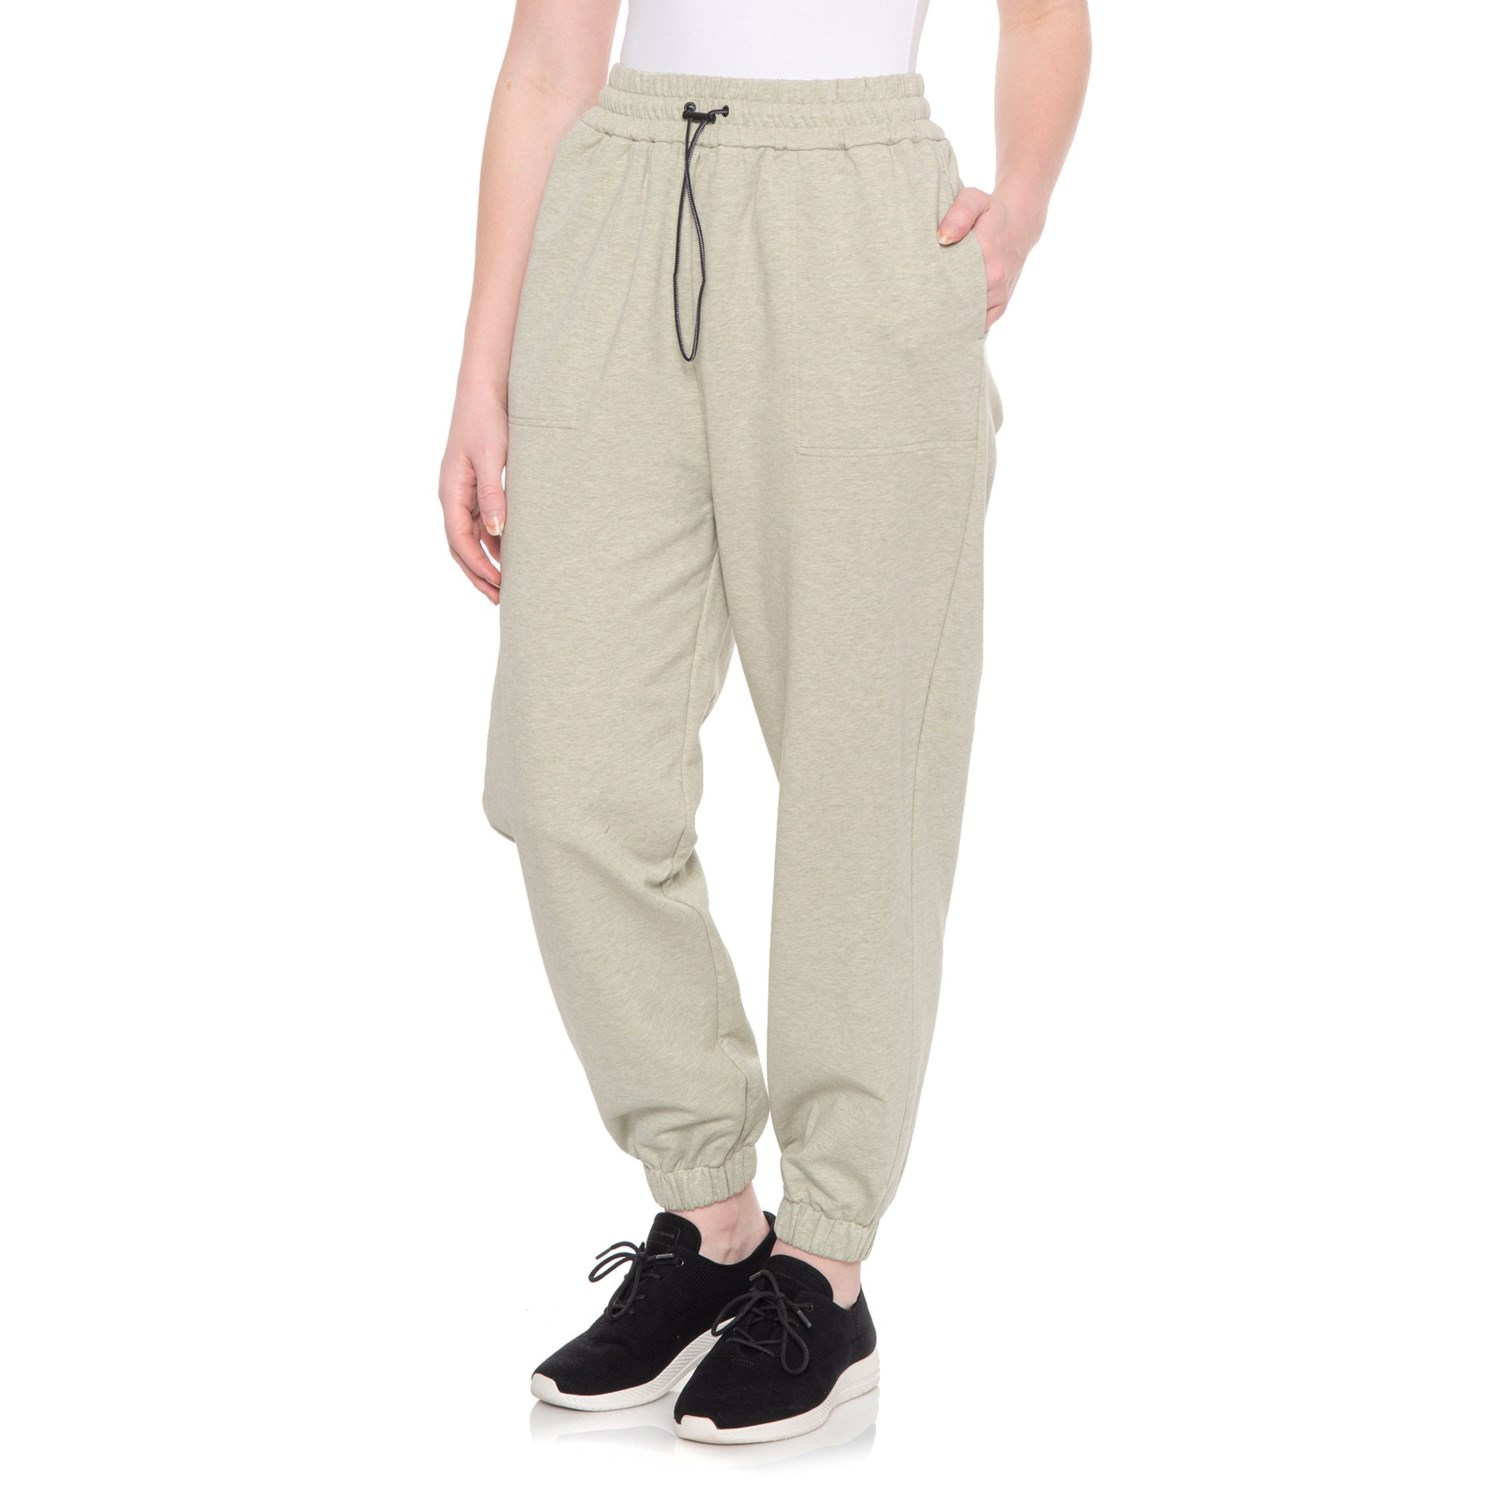 Varley Nevada Pants (For Women) - Save 40%